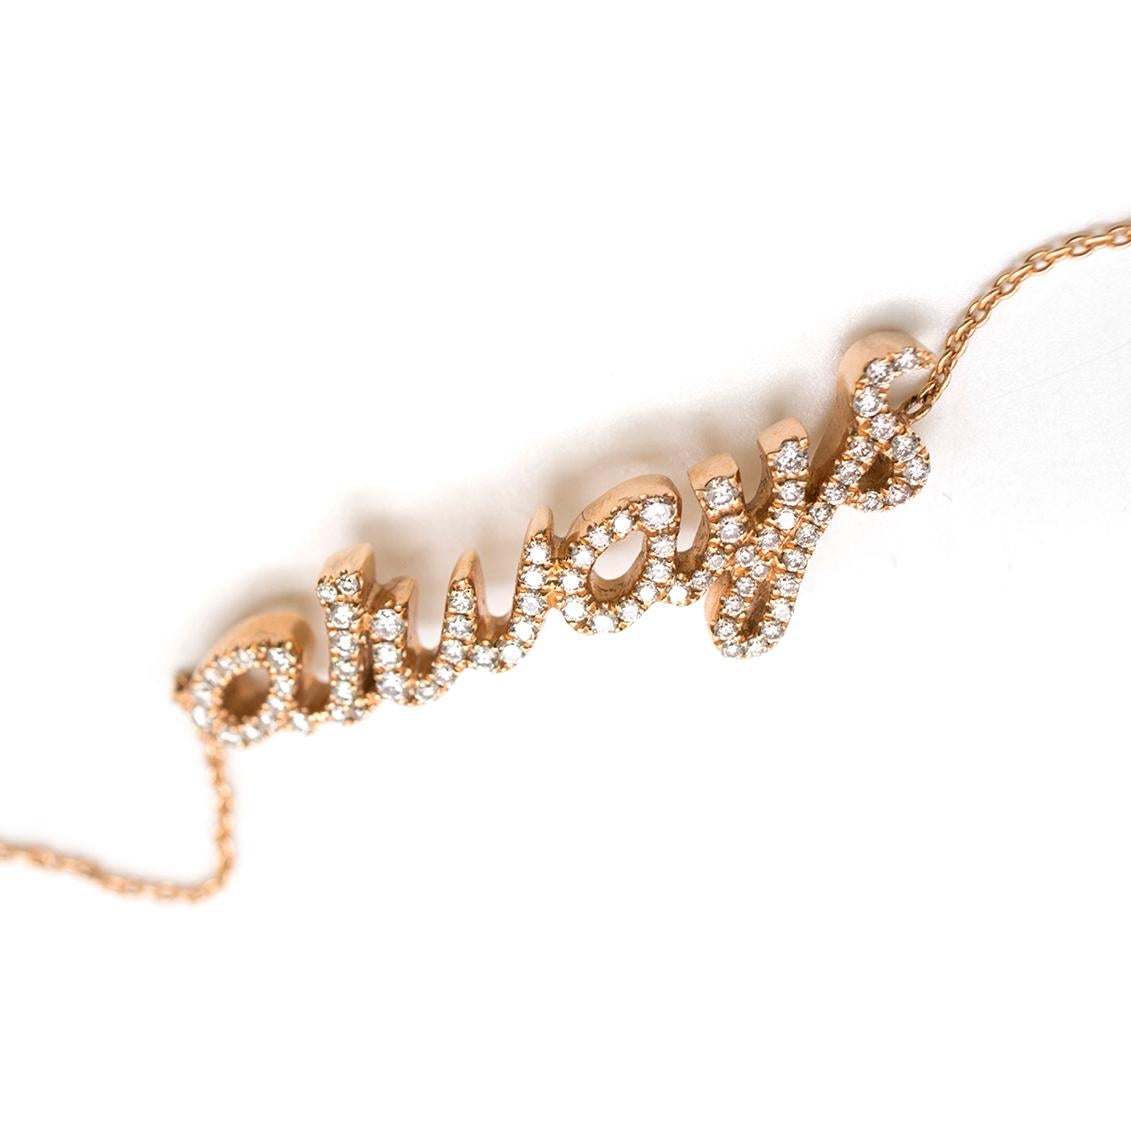 Pia Hallstrom 'Always' 0.61ct Diamond Rose-Gold Bracelet

- 18k rose-gold lightweight chain with white diamonds
- 'always' encurusted with 0.61ct high quality white diamonds 
- High quality lightweight 18k rose-gold
- Fine chain 
- End of line